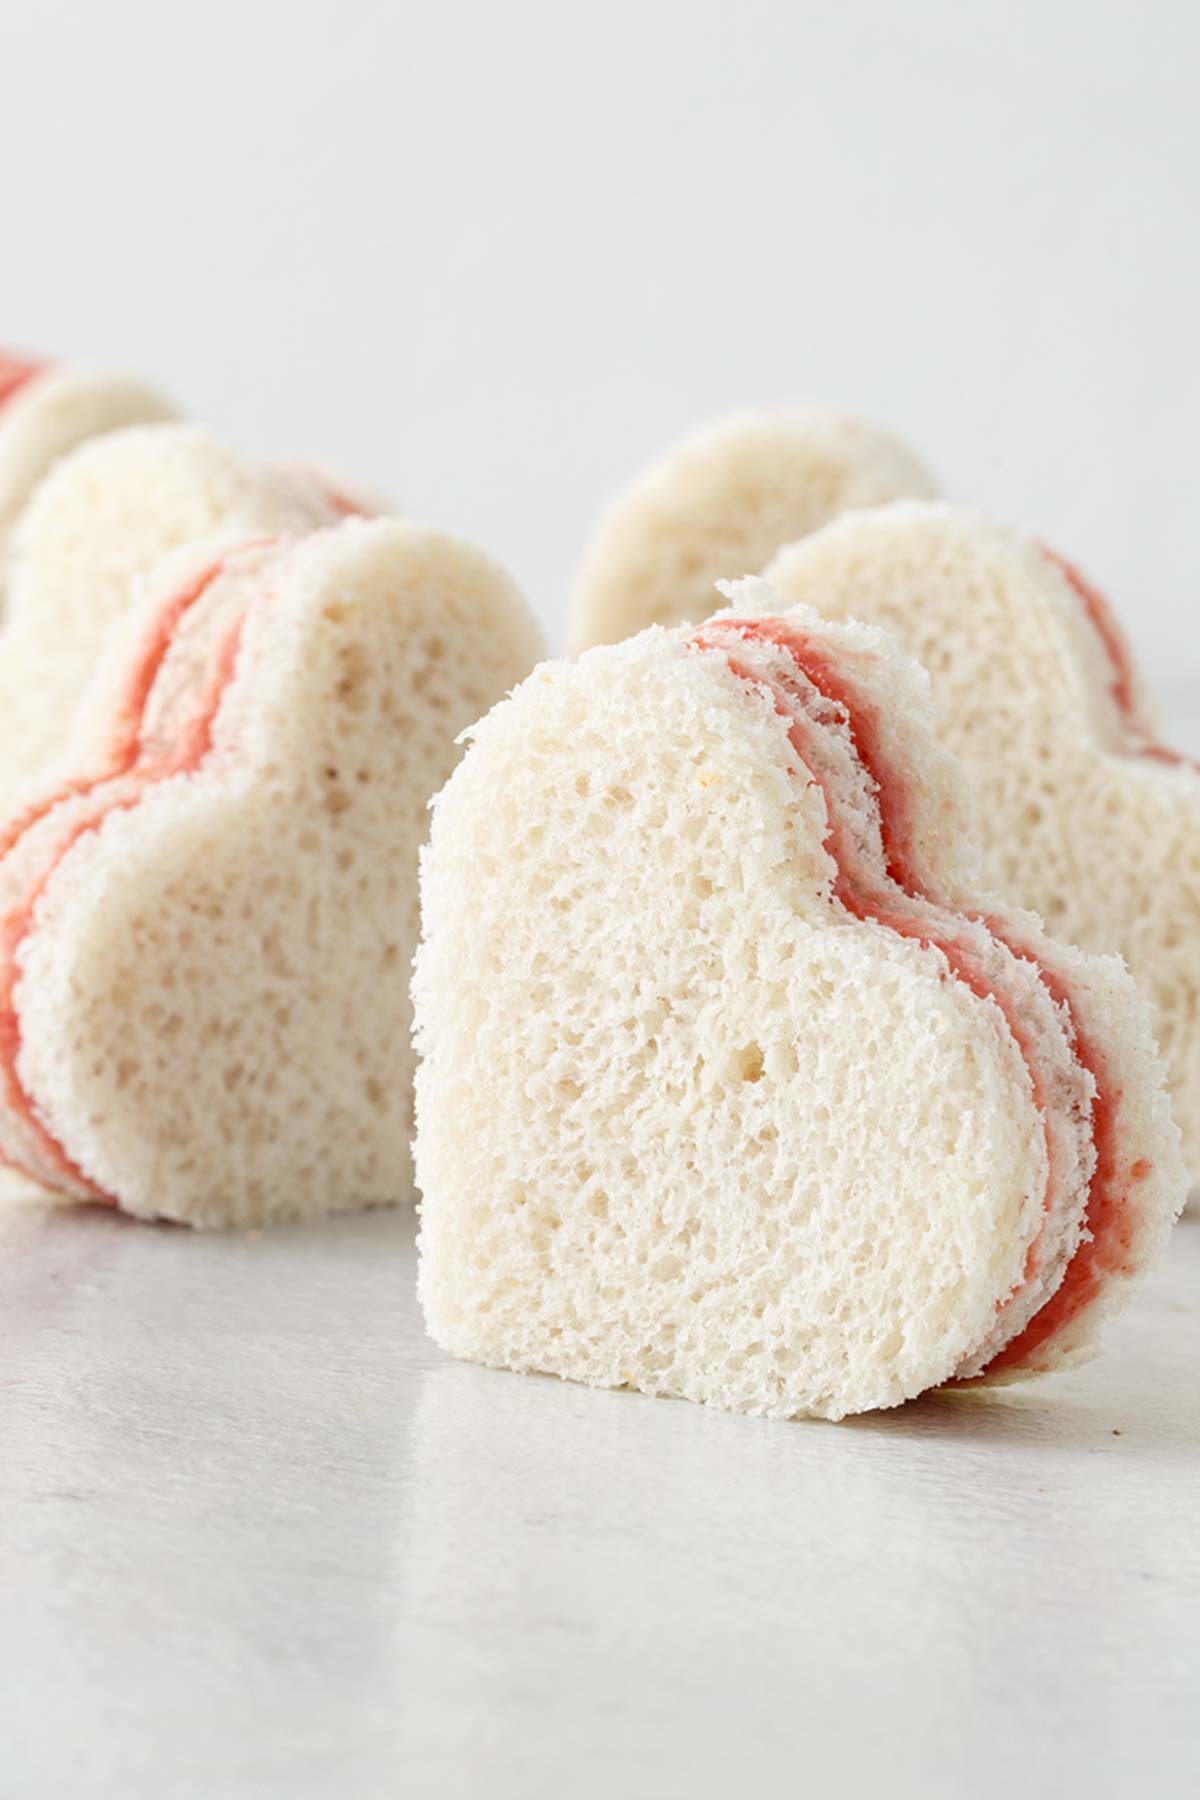 Heart-shaped tea sandwiches with strawberry filling.